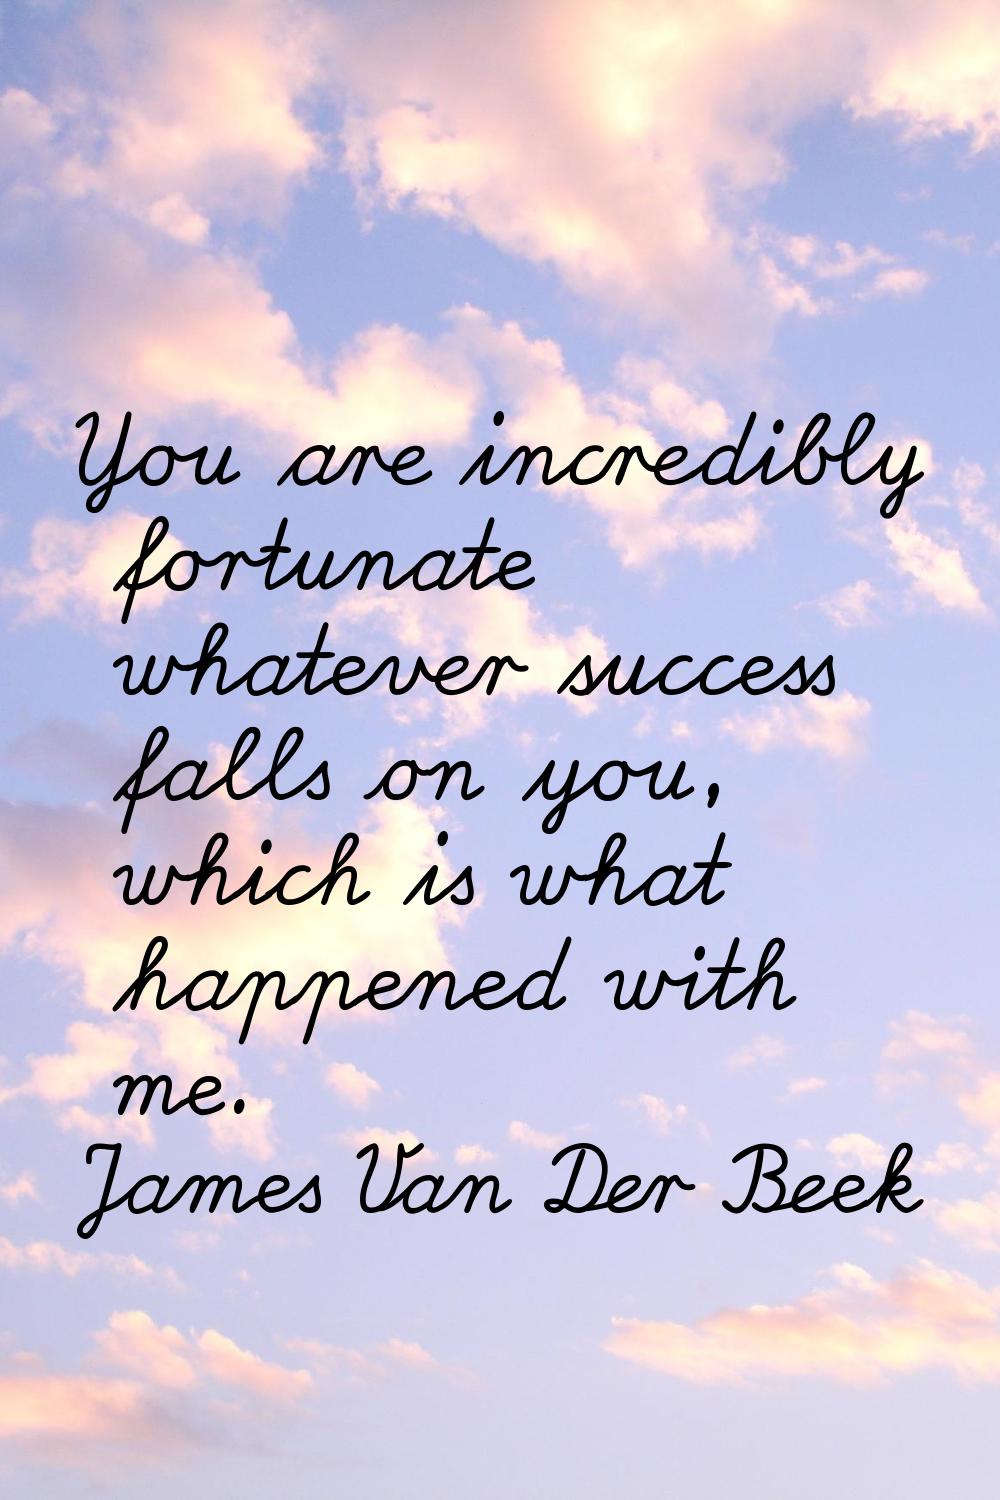 You are incredibly fortunate whatever success falls on you, which is what happened with me.